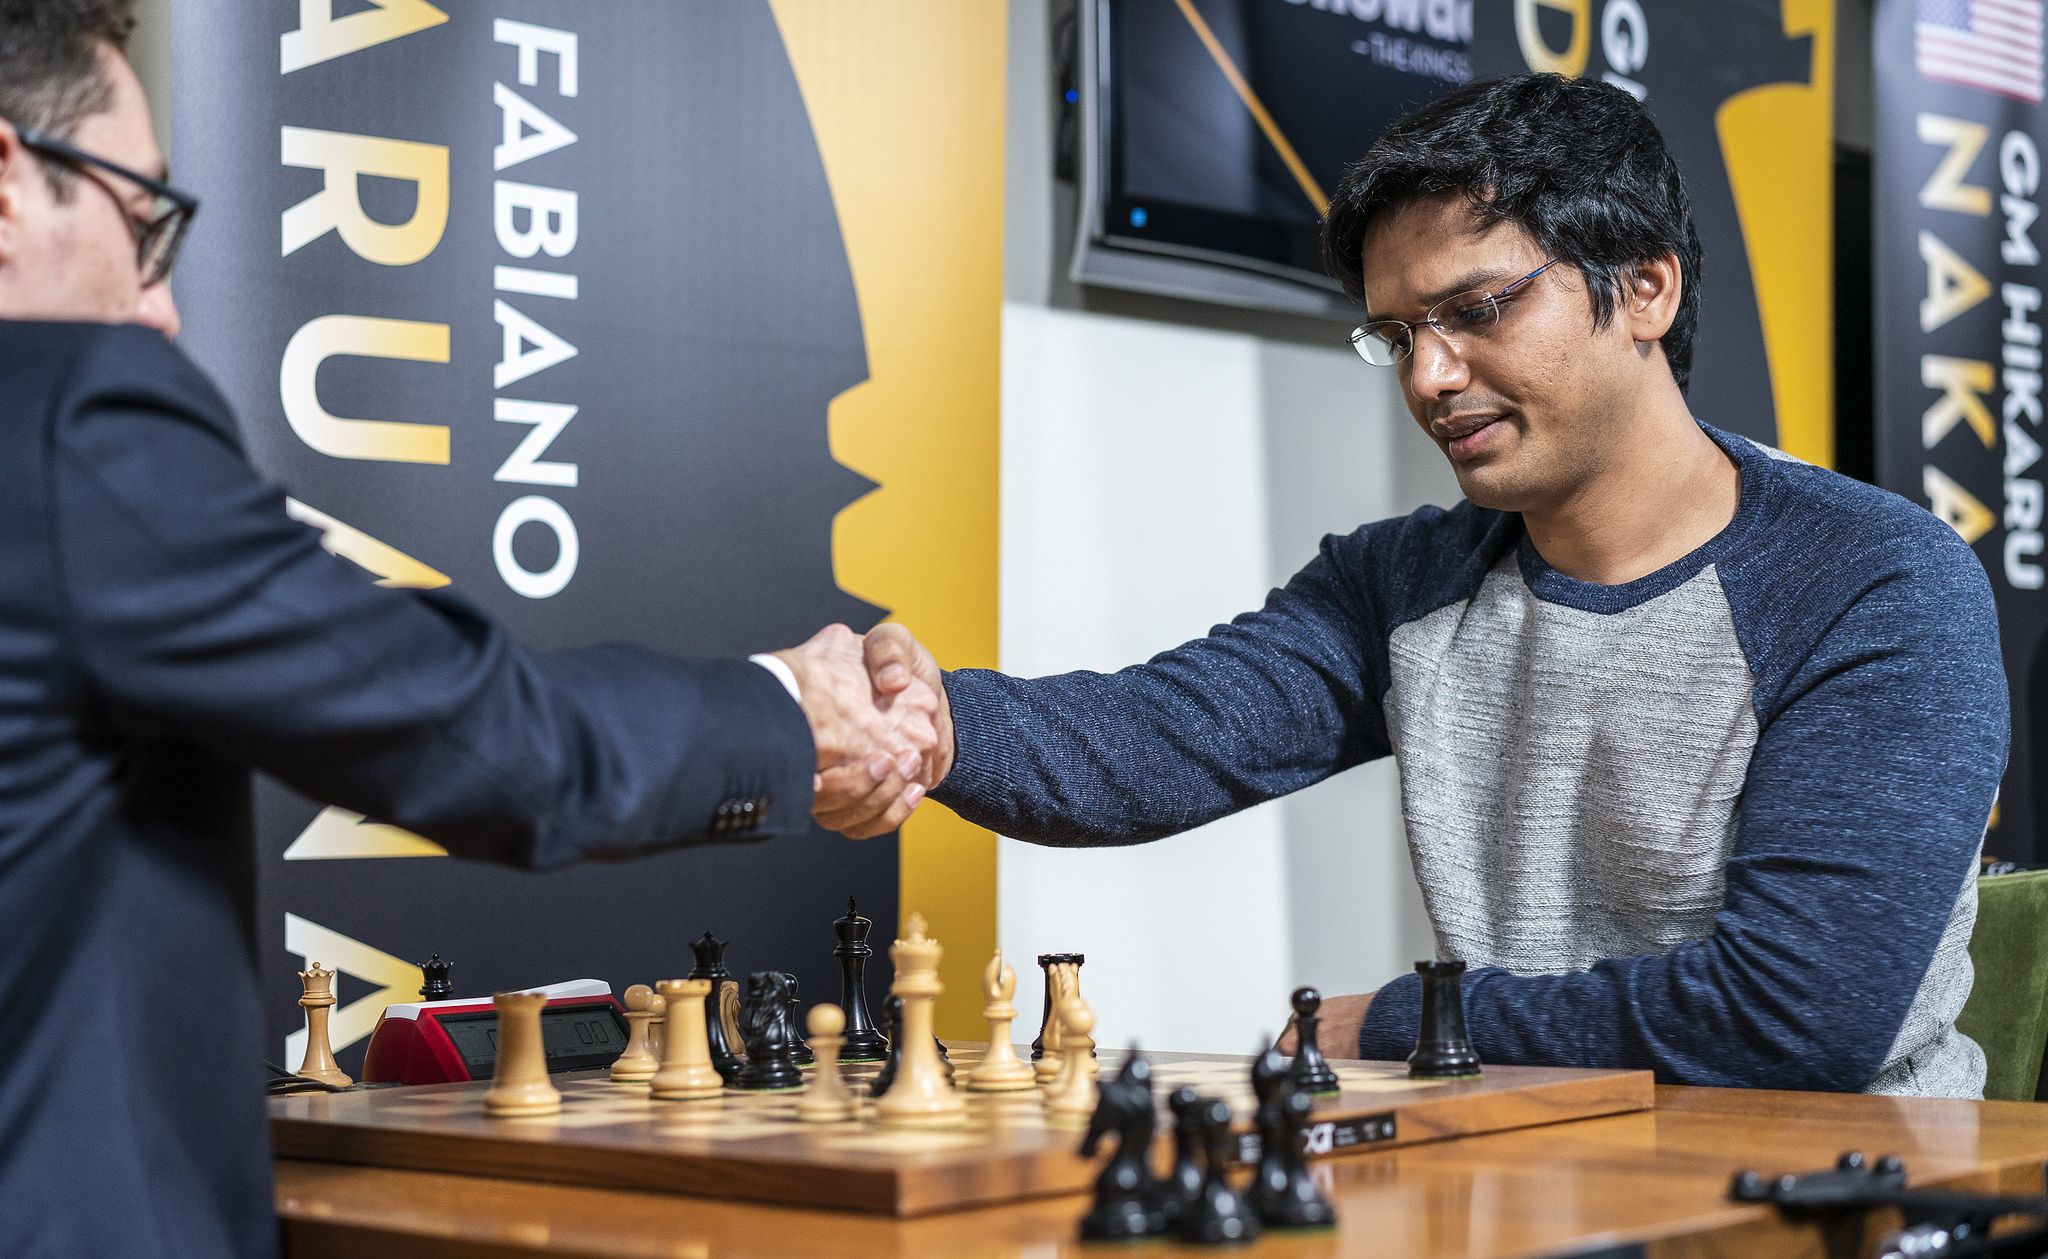 Fabiano Caruana Is Doing The Impossible At Chess's Most Competitive  Tournament